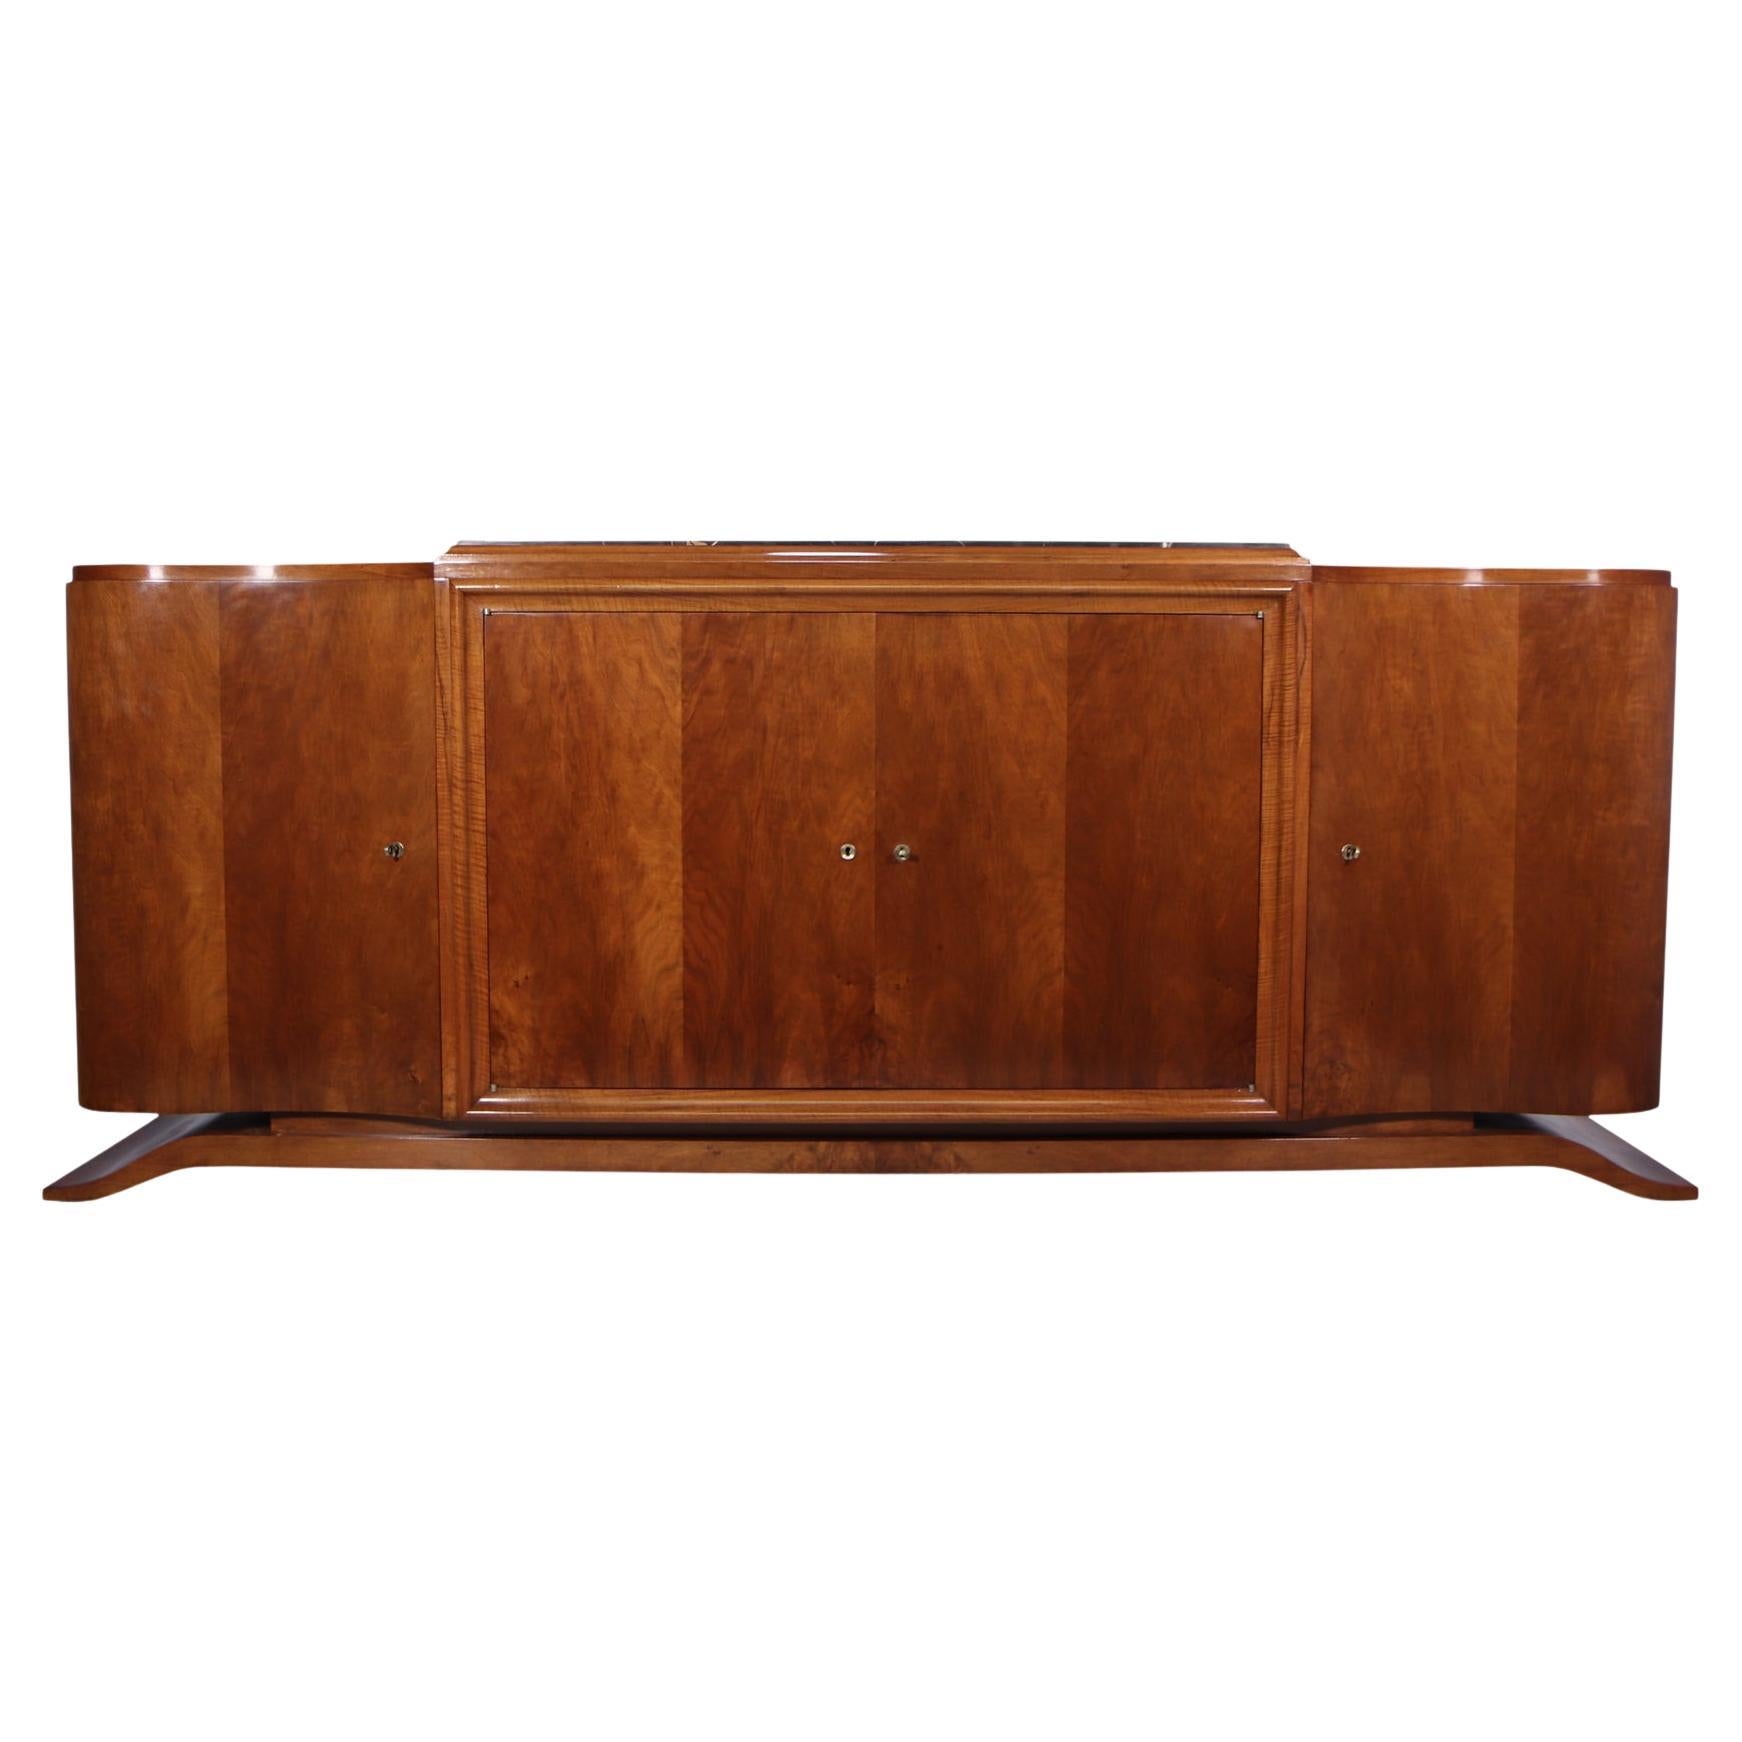 Very Large Four Door Sideboard by Maison Gouffe from Paris in the 1930’s